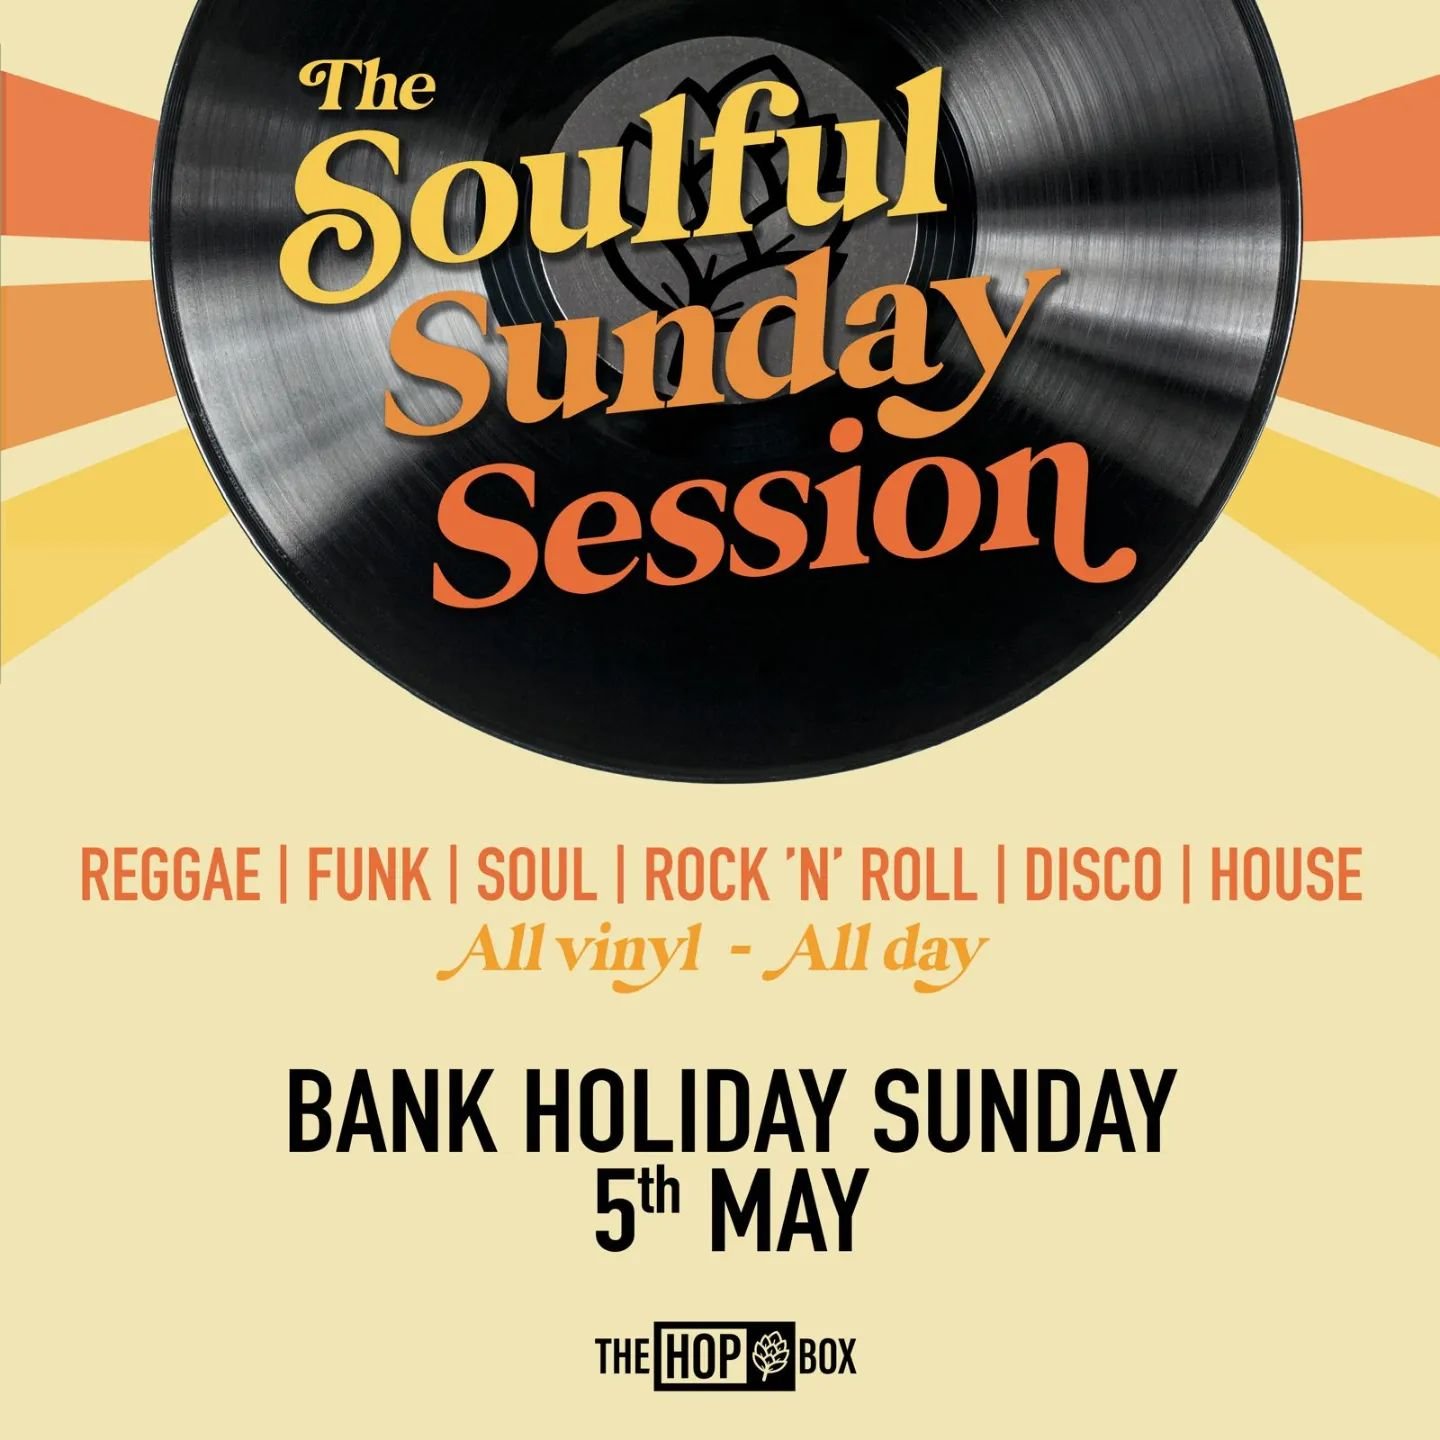 🎵 THE SOULFUL SUNDAY SESSION 🎵 

This coming Bank Holiday Sunday 5th May, we've got the inaugural Soulful Sunday Session at The Hop Box.

Local mixologist @tim_fielding is going to be on the decks across the afternoon and early evening dropping an 